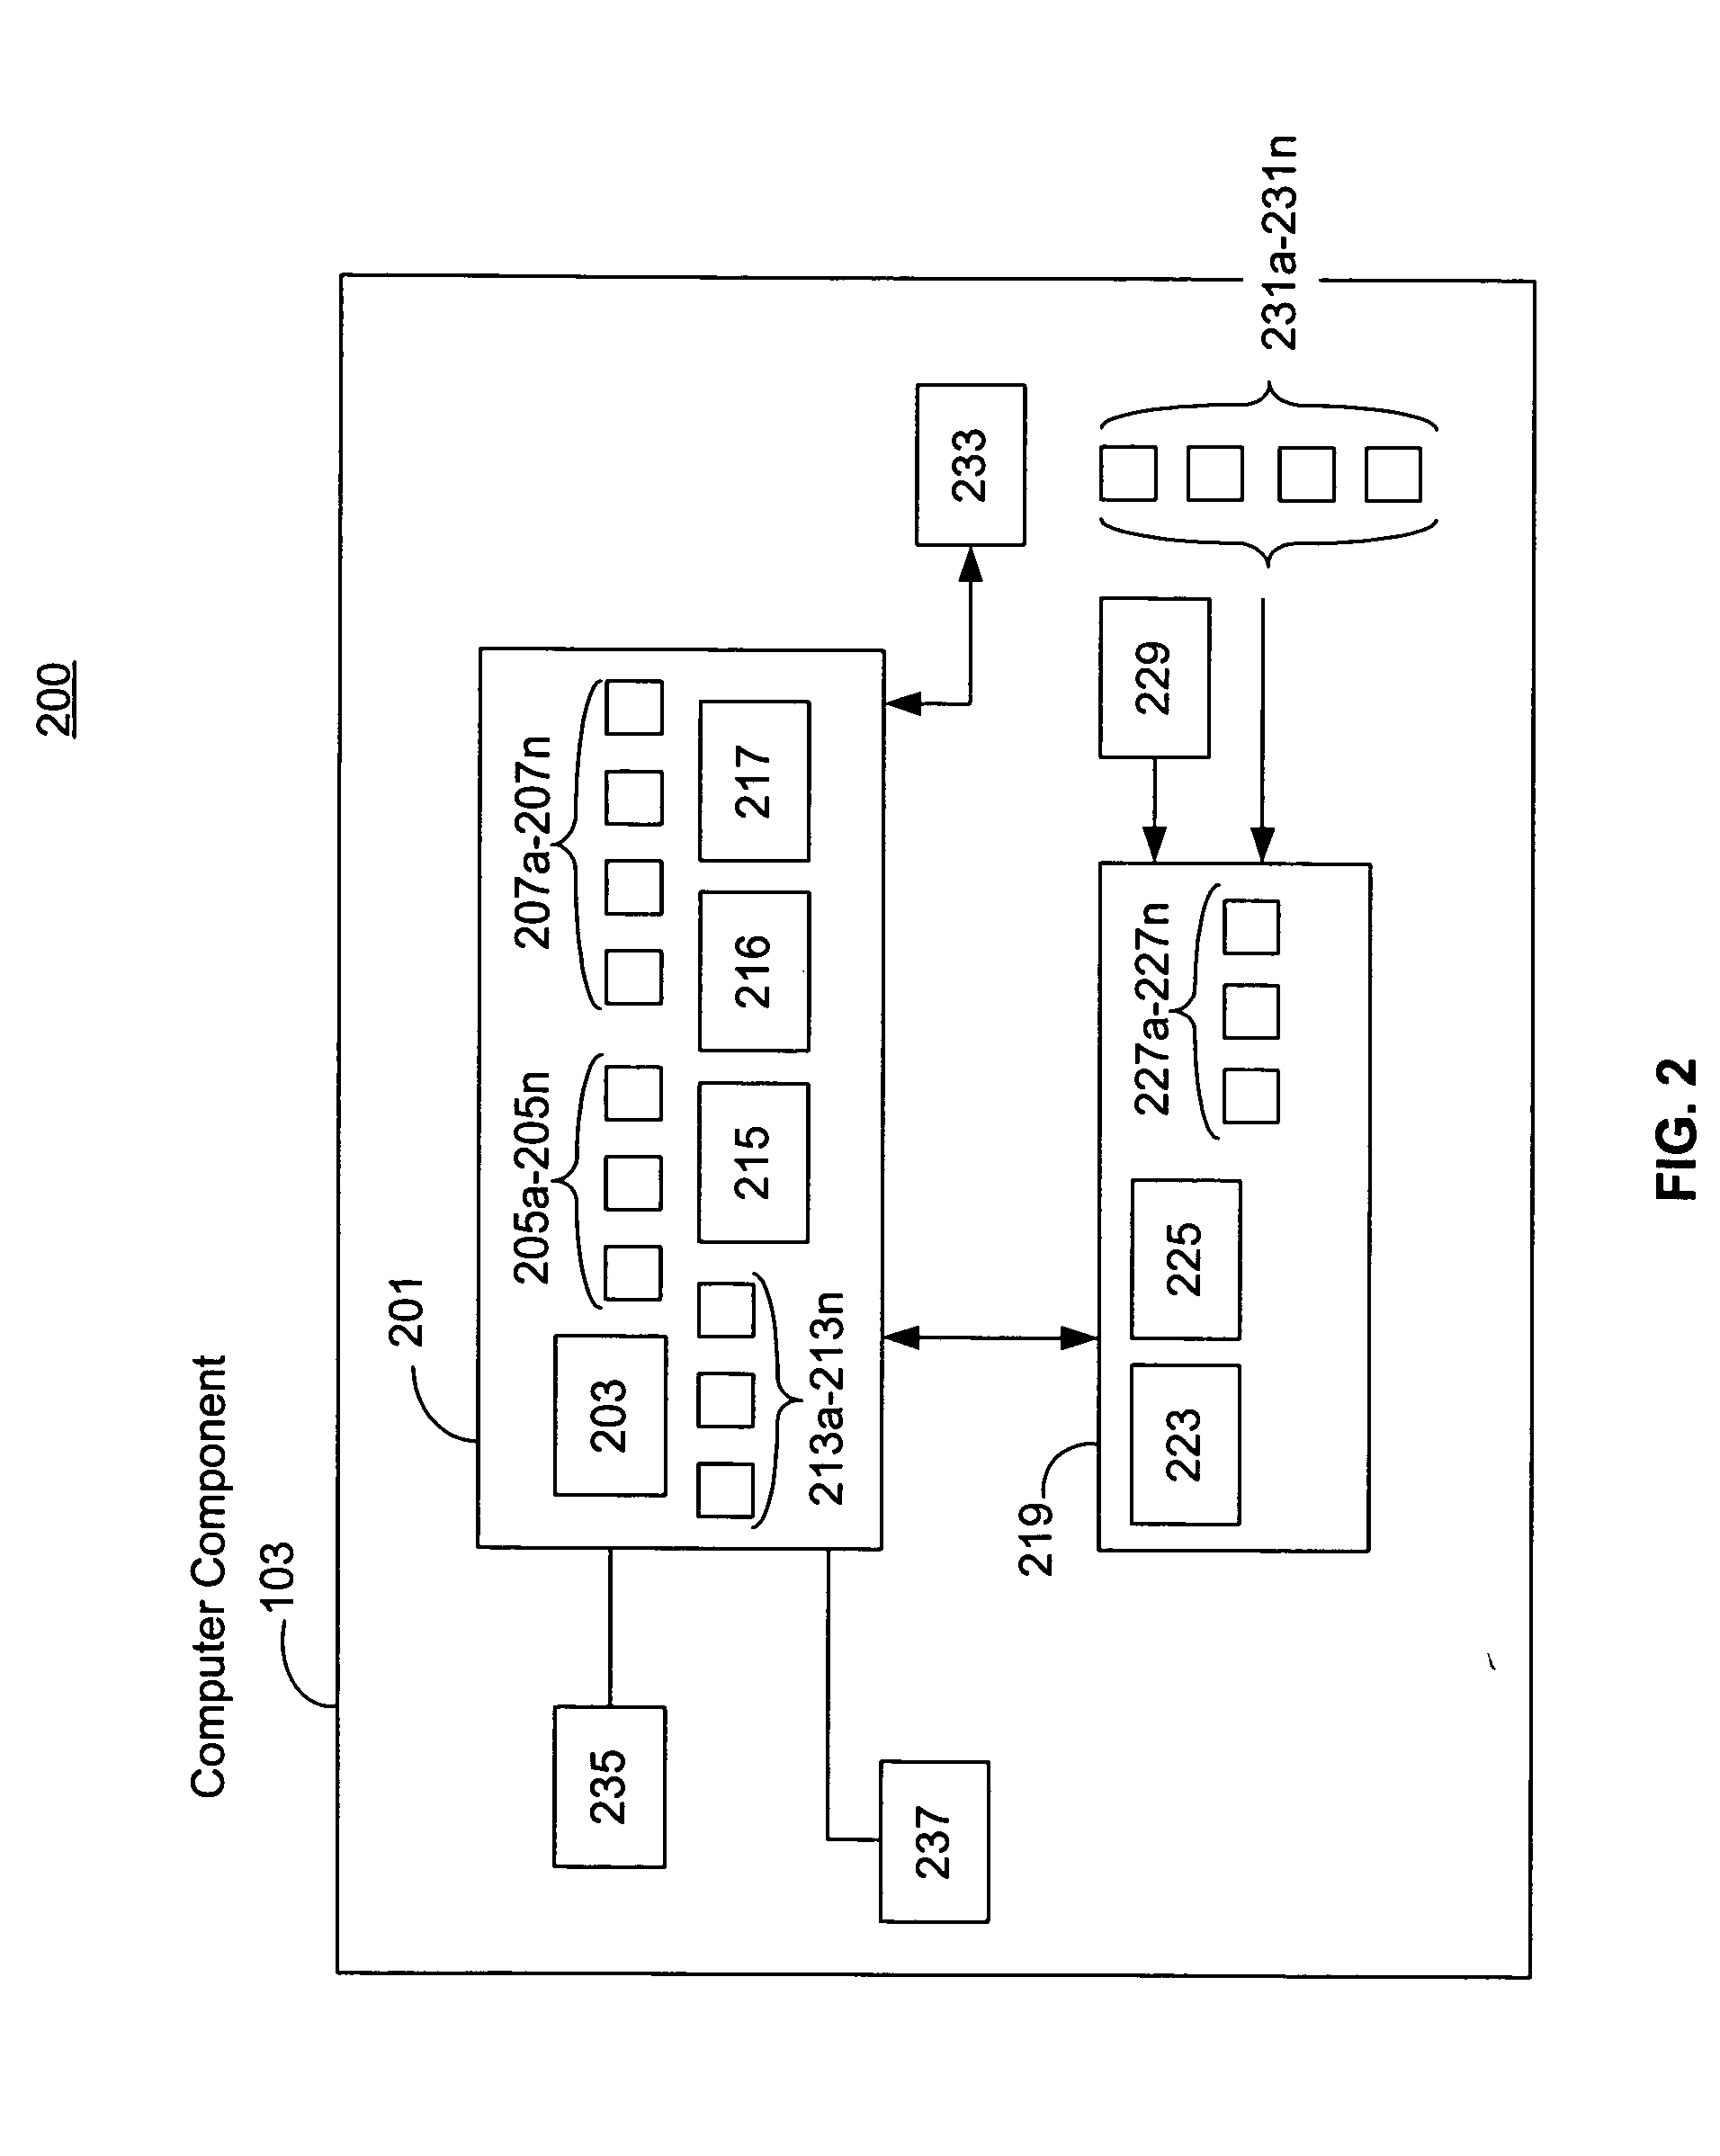 System and method for testing fuel tank integrity